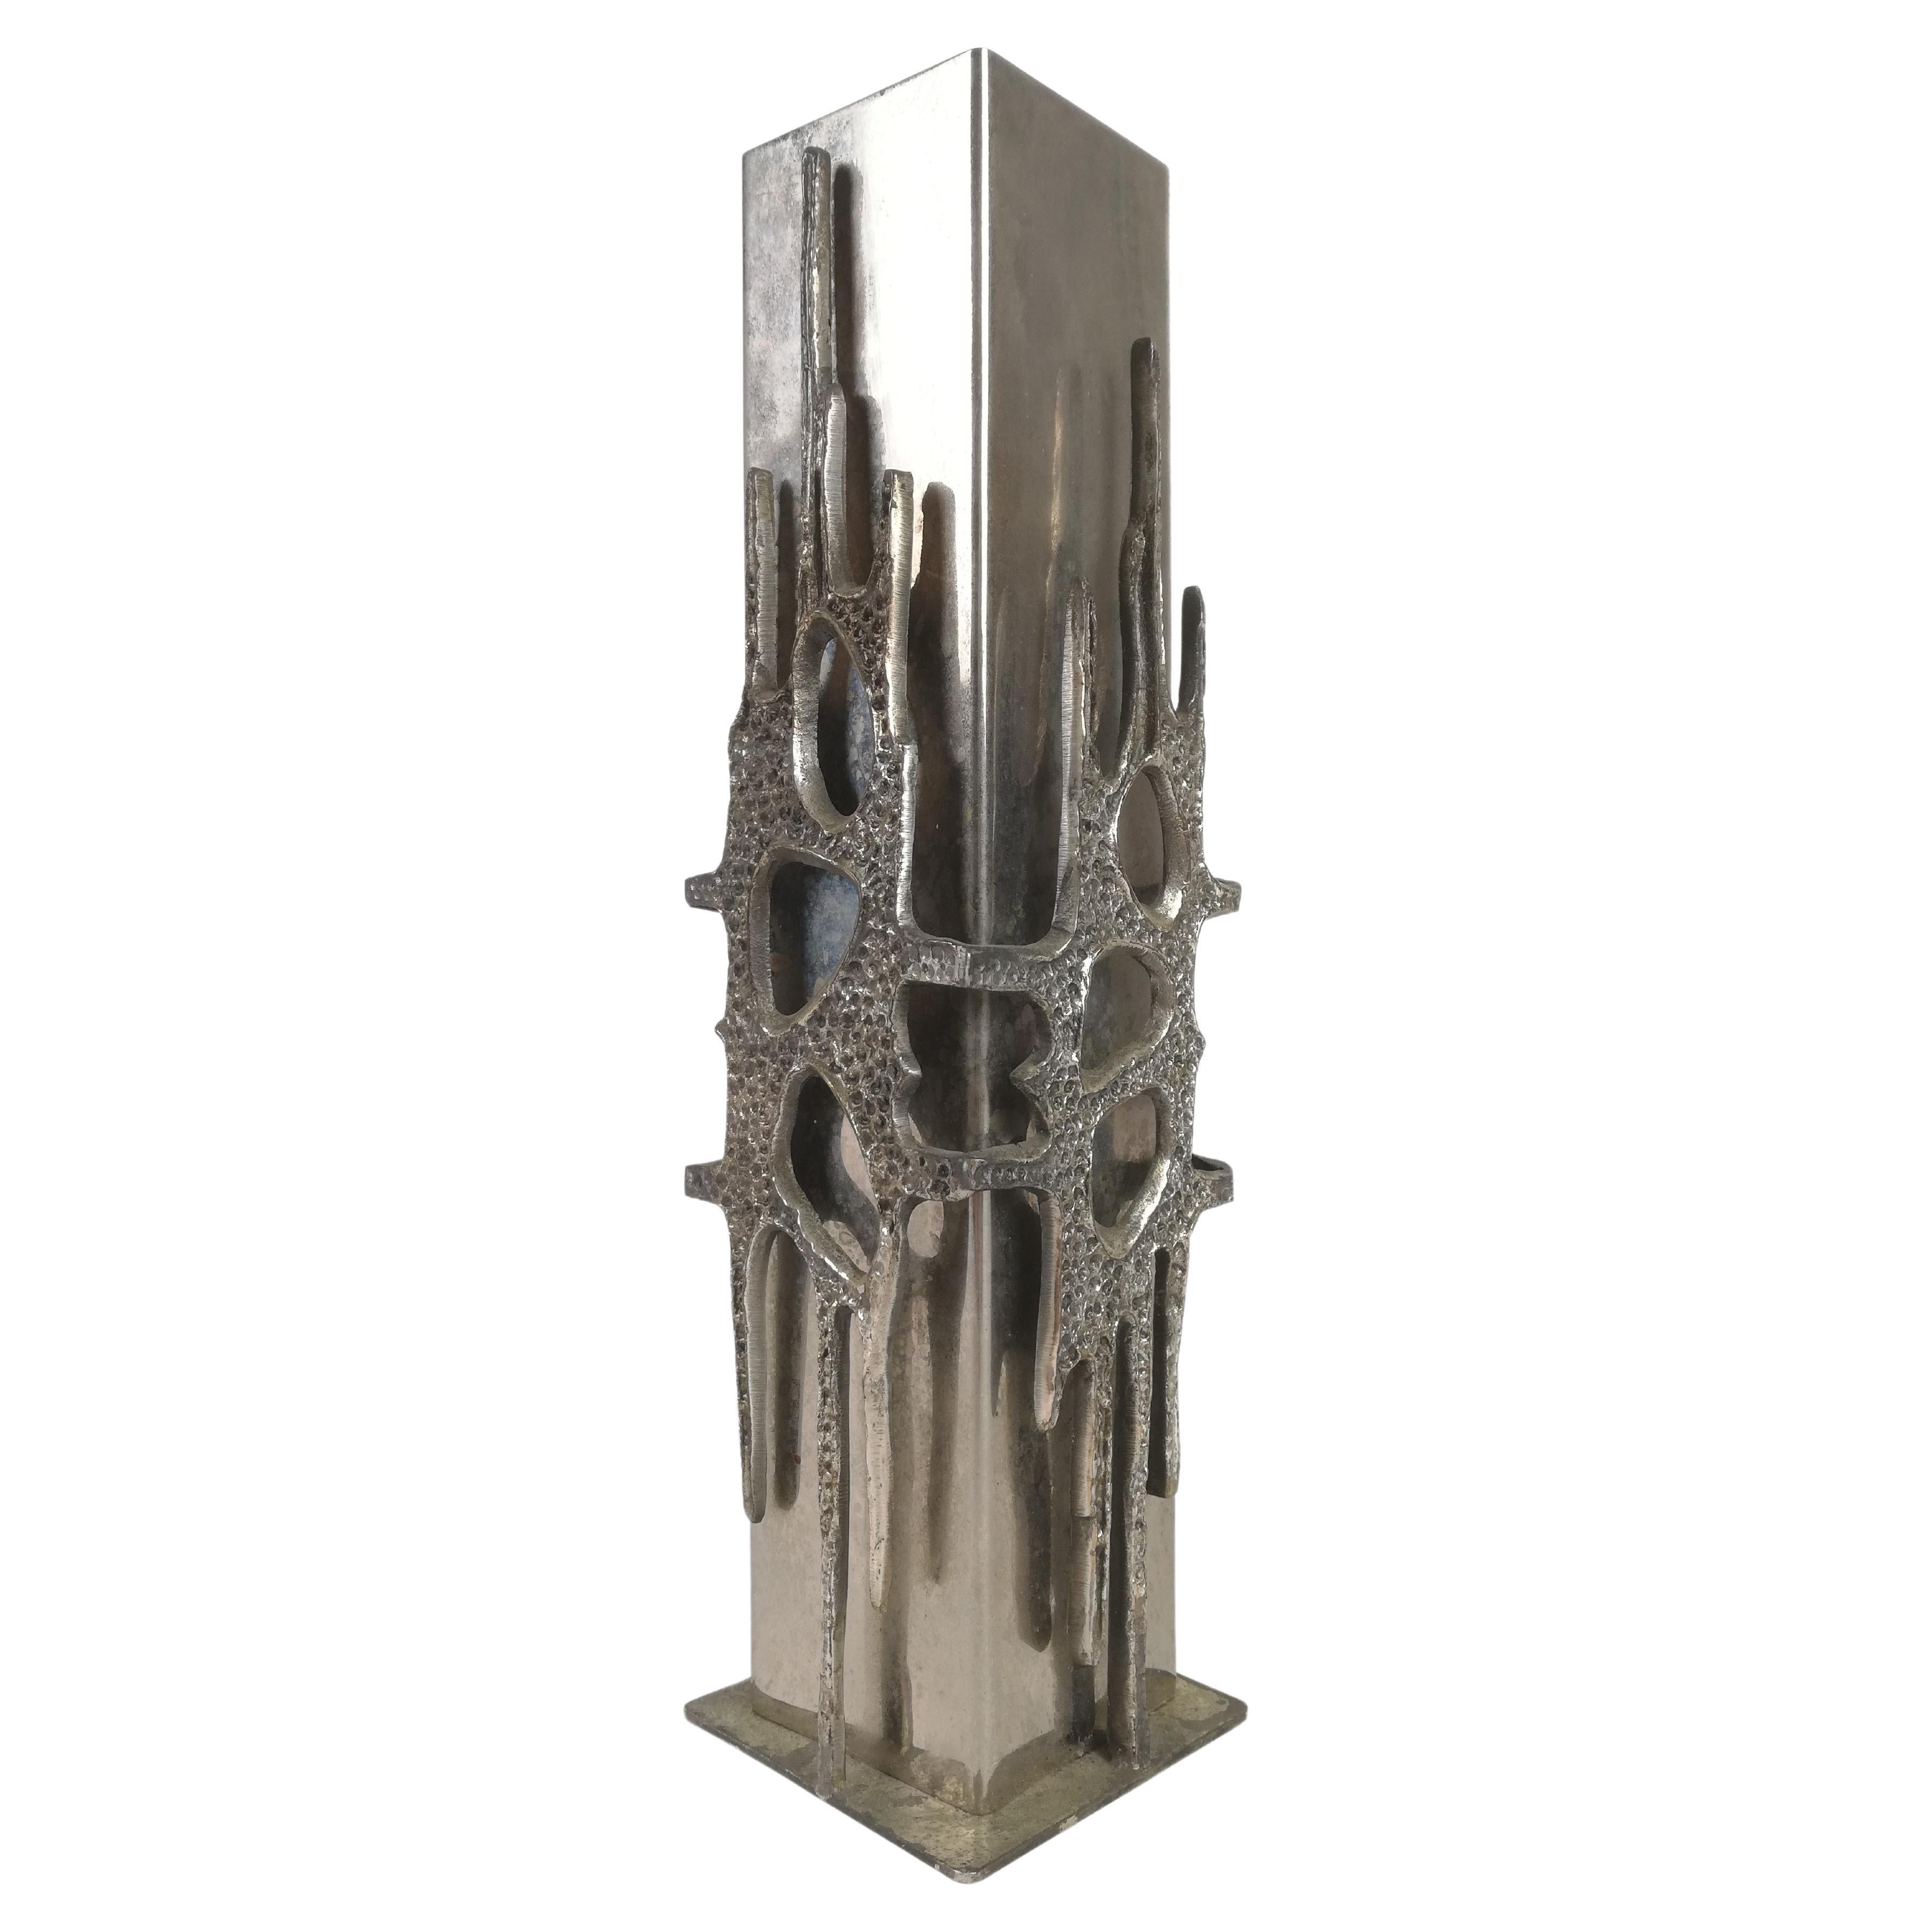 Brutalist Italian Steel Vase in the Style of Luciano Frigerio, Italy 1970s For Sale